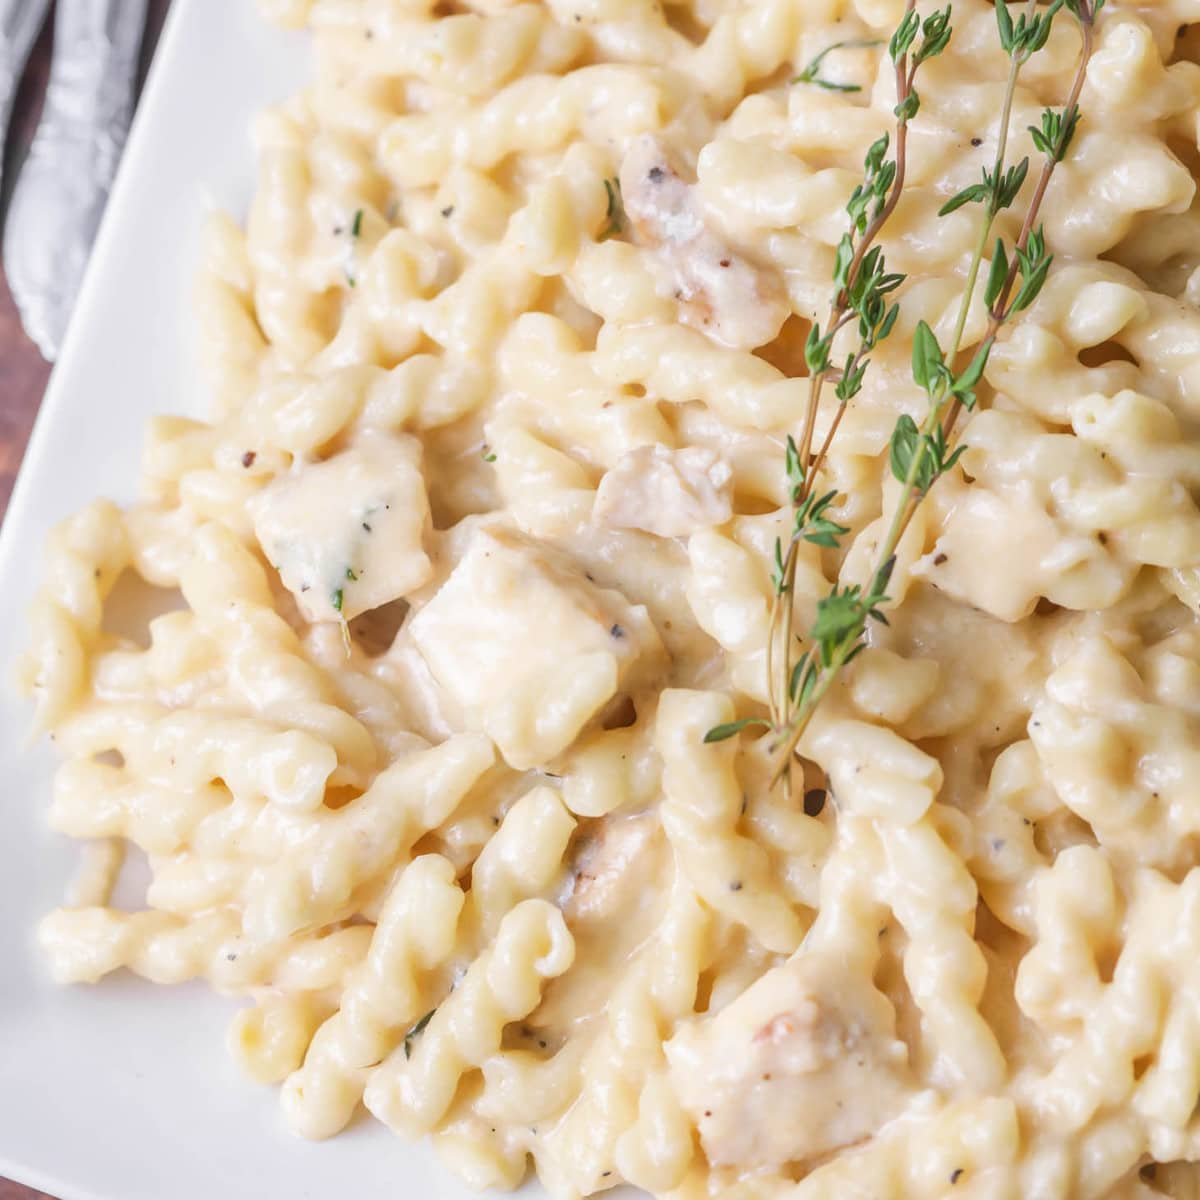 Cheesy chicken pasta on a plate